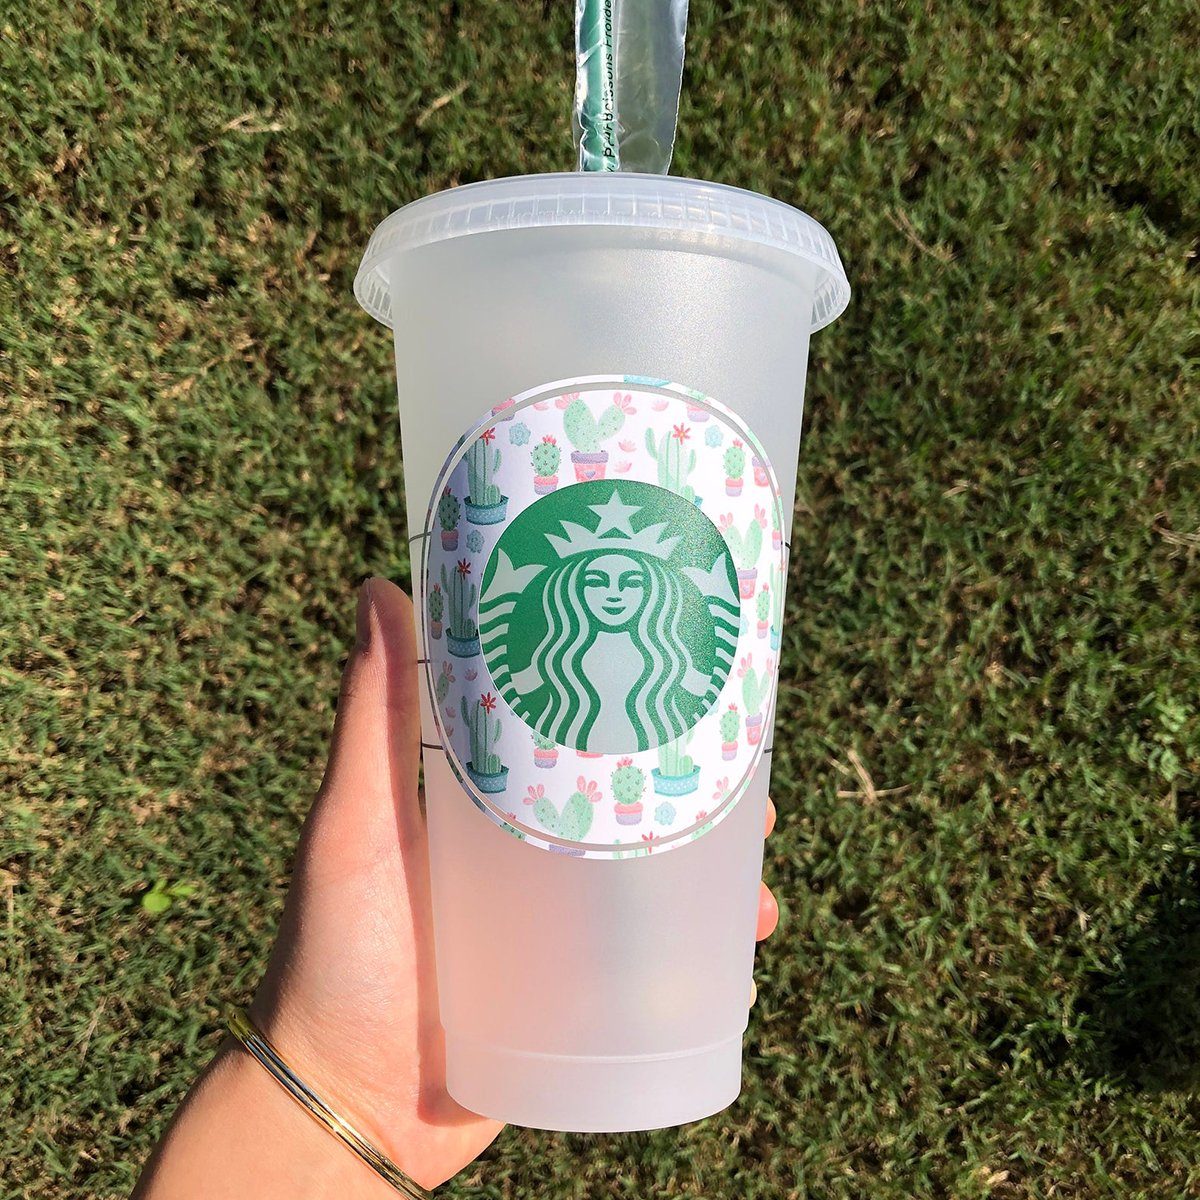 Starbucks Cup Tumbler - Custom Cold Cup - Cute Cactus Pattern - Best Friend Wedding Gift - Personalized Holiday Gift for Her - Bridal Party